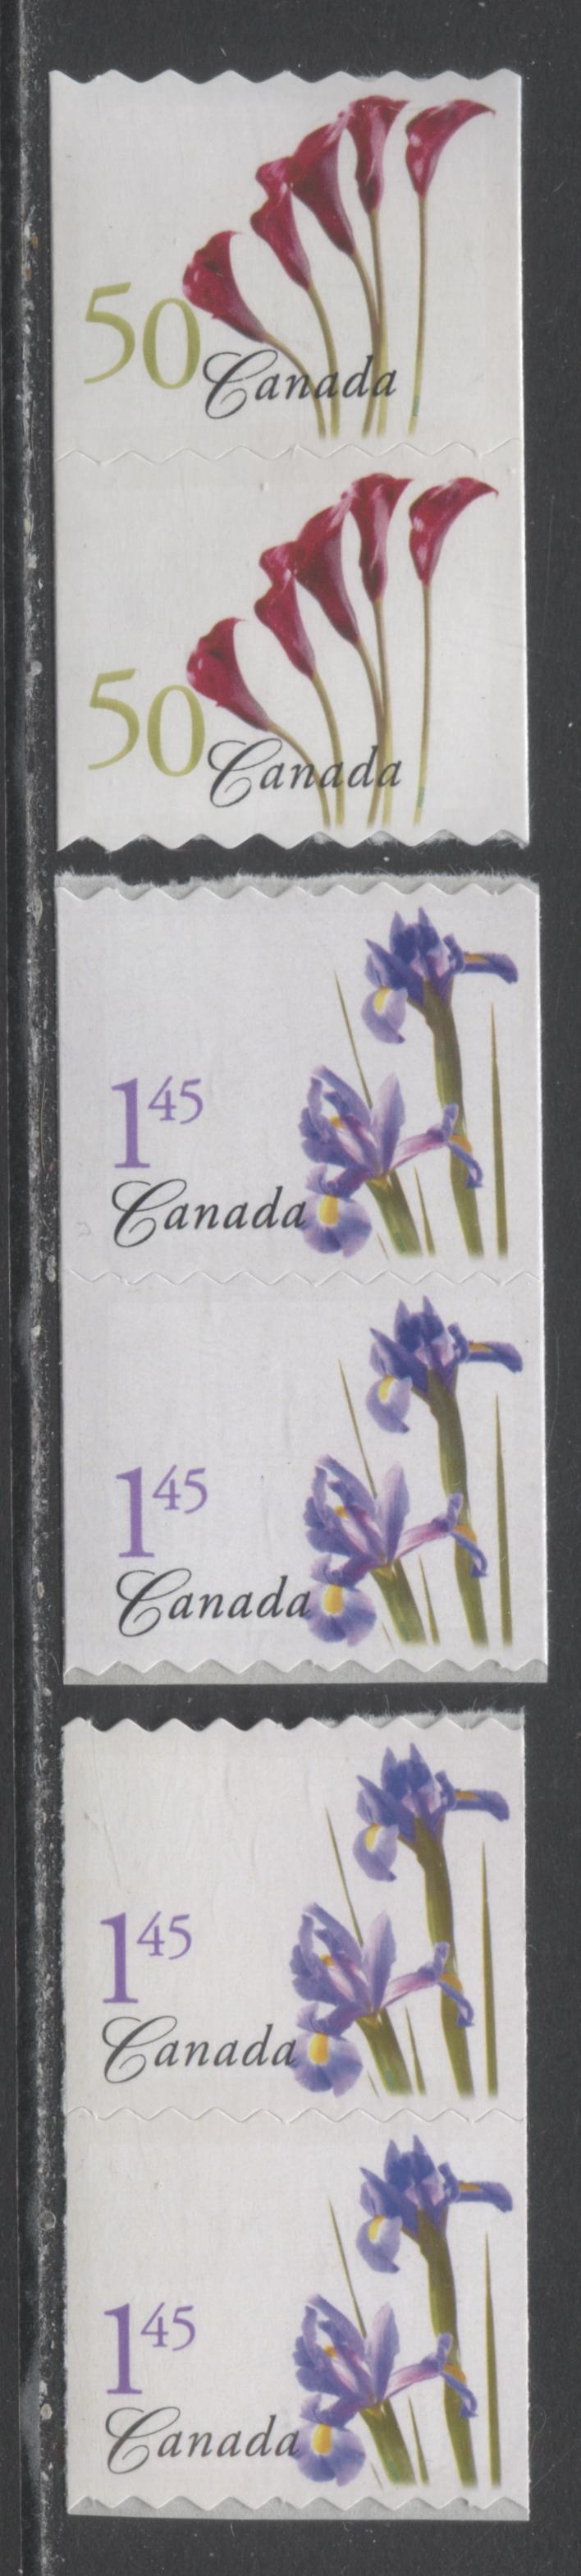 Lot 12 Canada #2072a-2074 50c-$1.45 Multicolored Red Calla Lily, Purple Dutch Iris, 2004 Flower Definitives (1) Coils Issue, 3 VFNH Pairs On DF & LF Paper $14